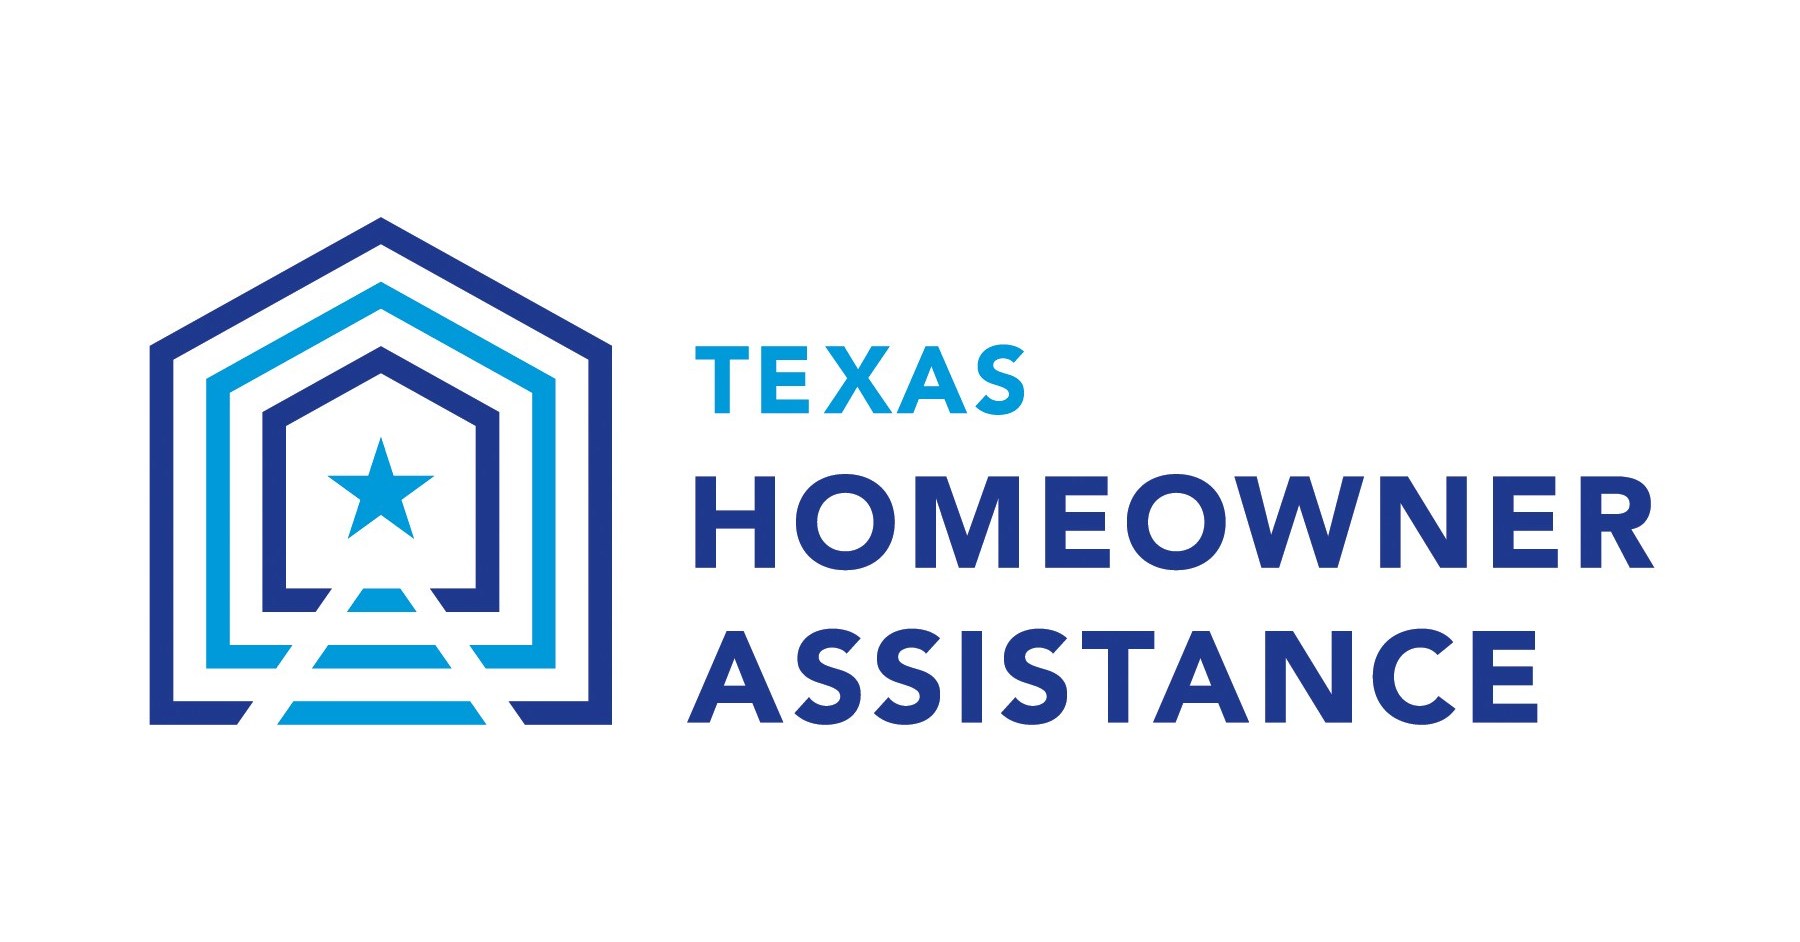 Texas Homeowner Assistance Program Exceeds 50 Million in Assistance